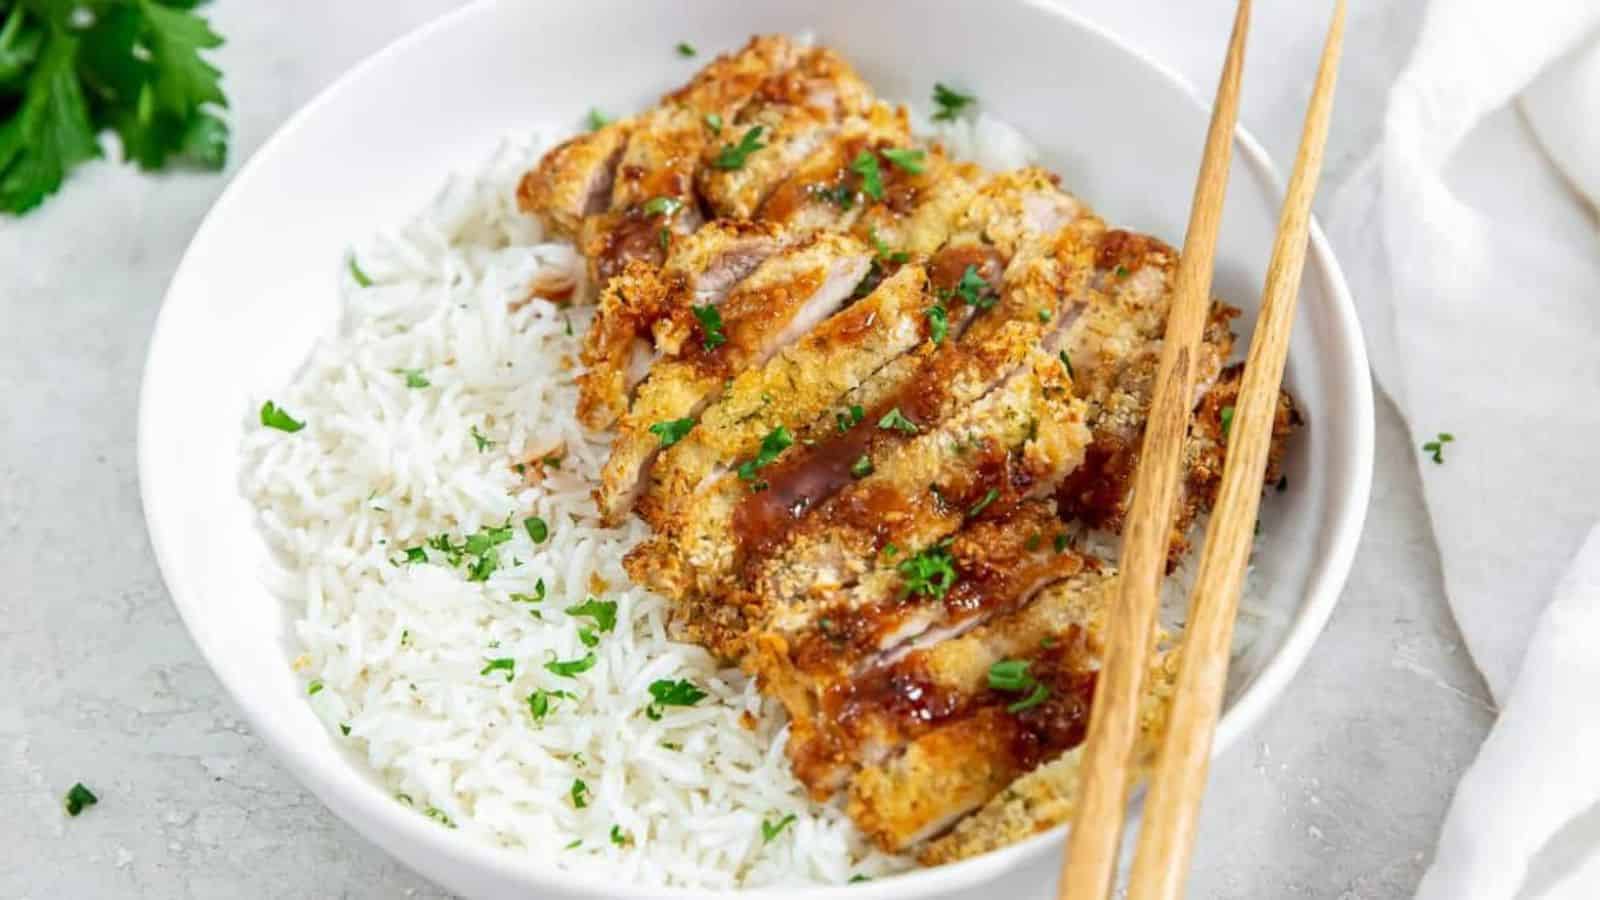 Air Fryer Chicken Katsu in a white bowl with a brown sauce, parsley, white rice, and chopsticks.